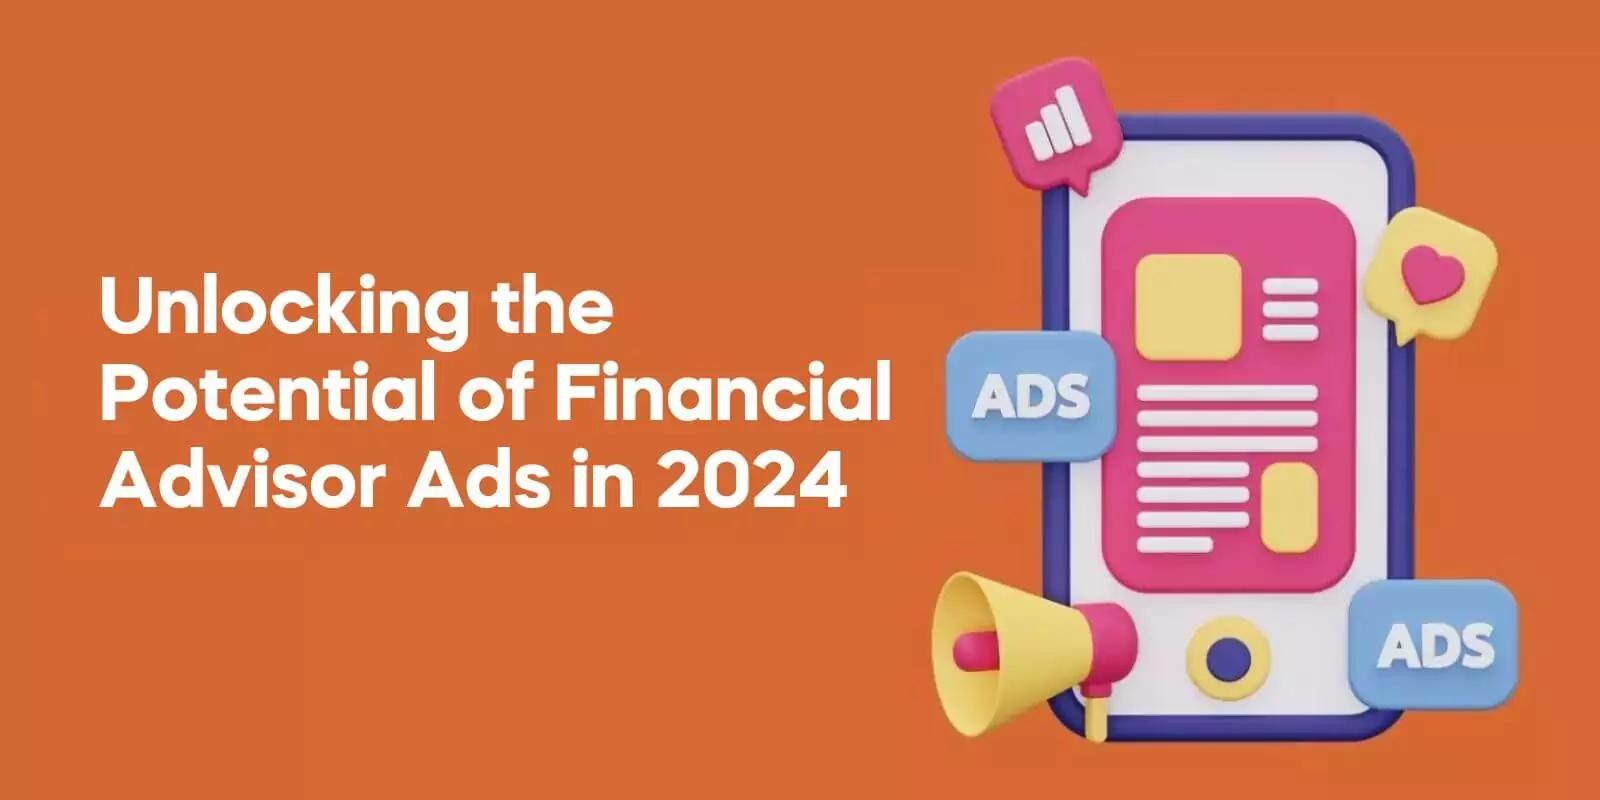 Unlocking the Potential of Financial Advisor Ads in 2024